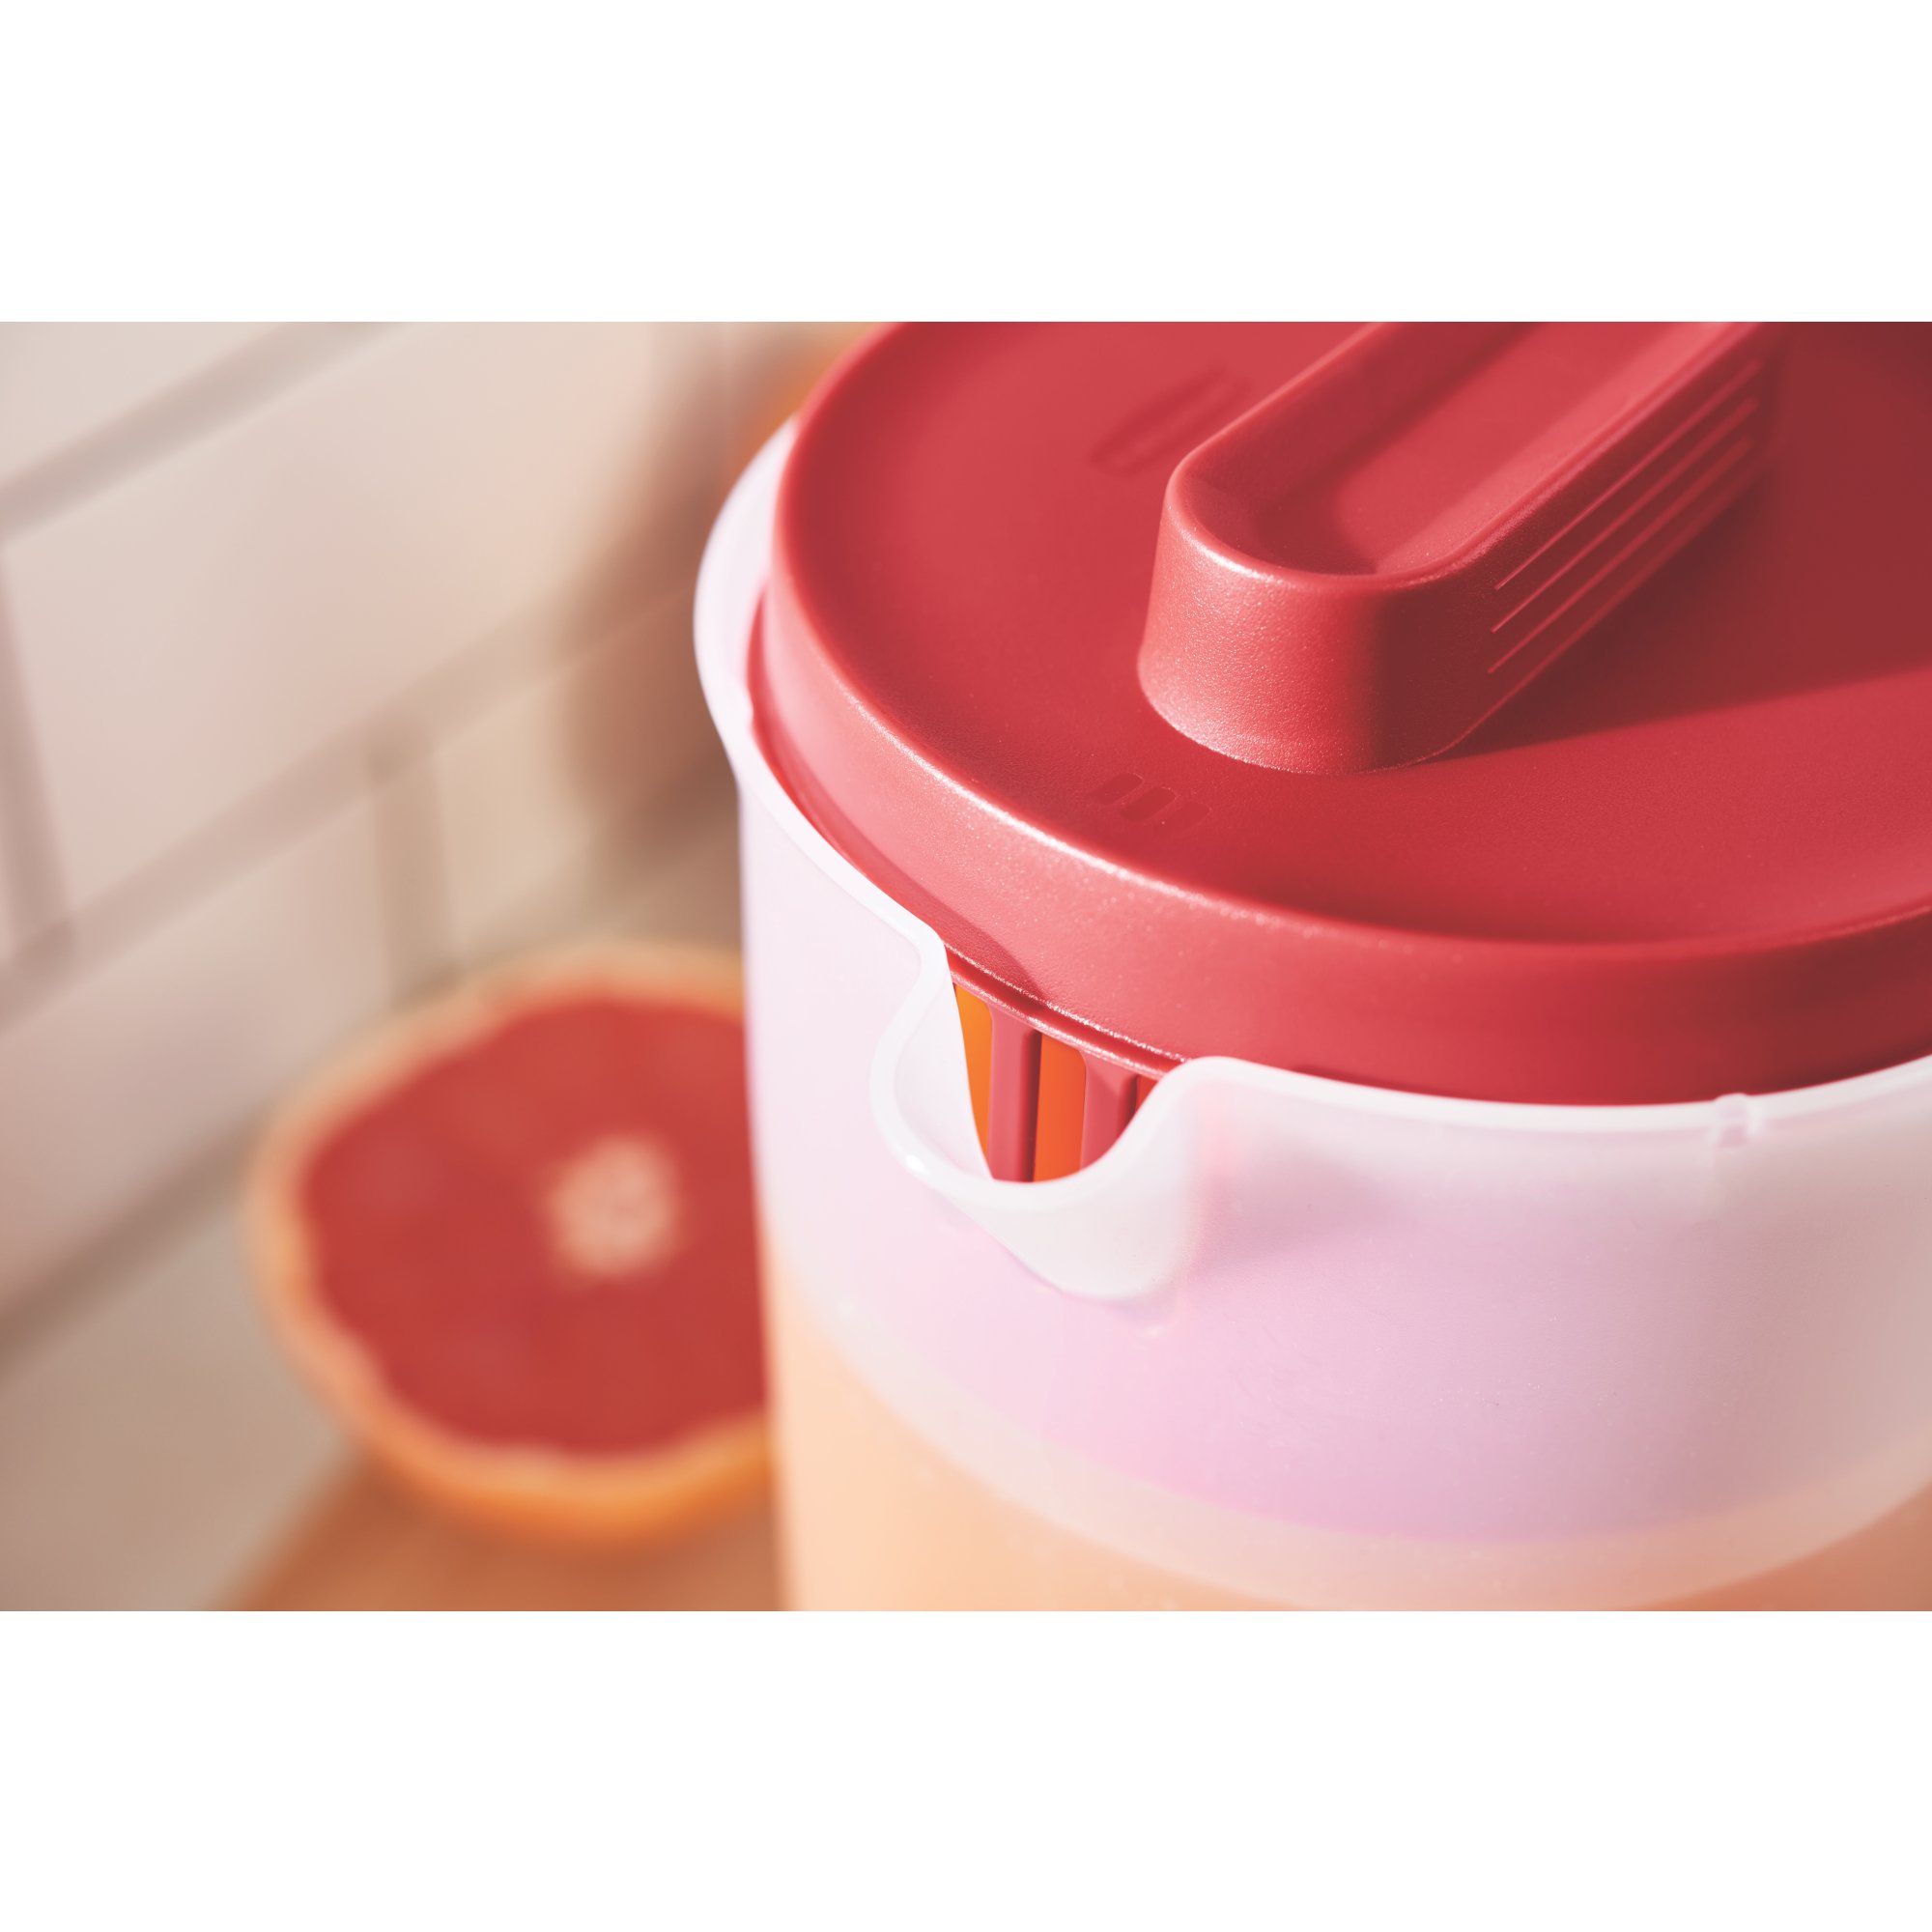 https://s7d9.scene7.com/is/image/NewellRubbermaid/2122587-rubbermaid-food-storage-simply-pour-pitcher-2qt-red-kitchen-with-food-lifestyle-2?wid=2000&hei=2000